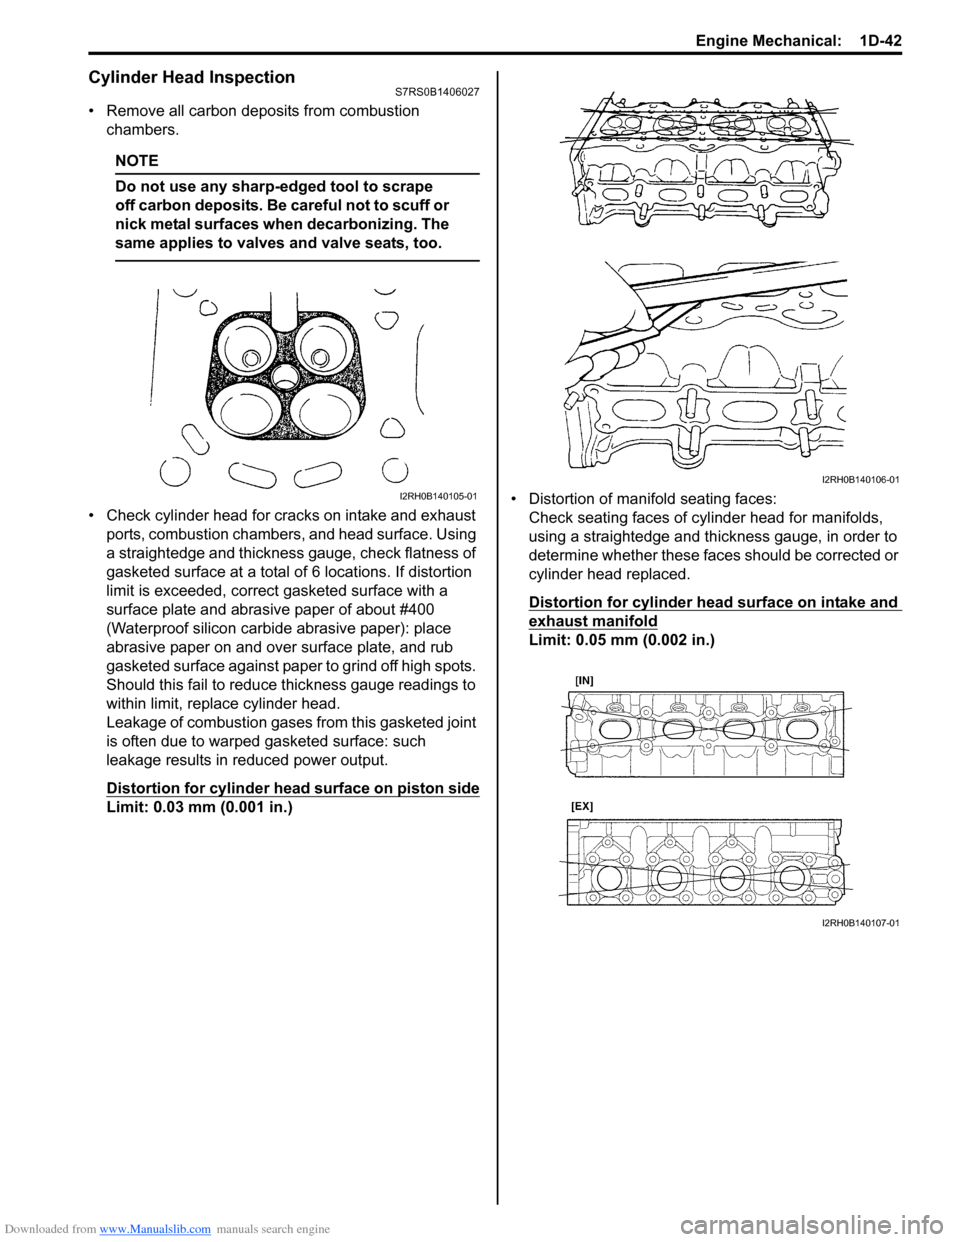 SUZUKI SWIFT 2005 2.G Service Workshop Manual Downloaded from www.Manualslib.com manuals search engine Engine Mechanical:  1D-42
Cylinder Head InspectionS7RS0B1406027
• Remove all carbon deposits from combustion chambers.
NOTE
Do not use any sh